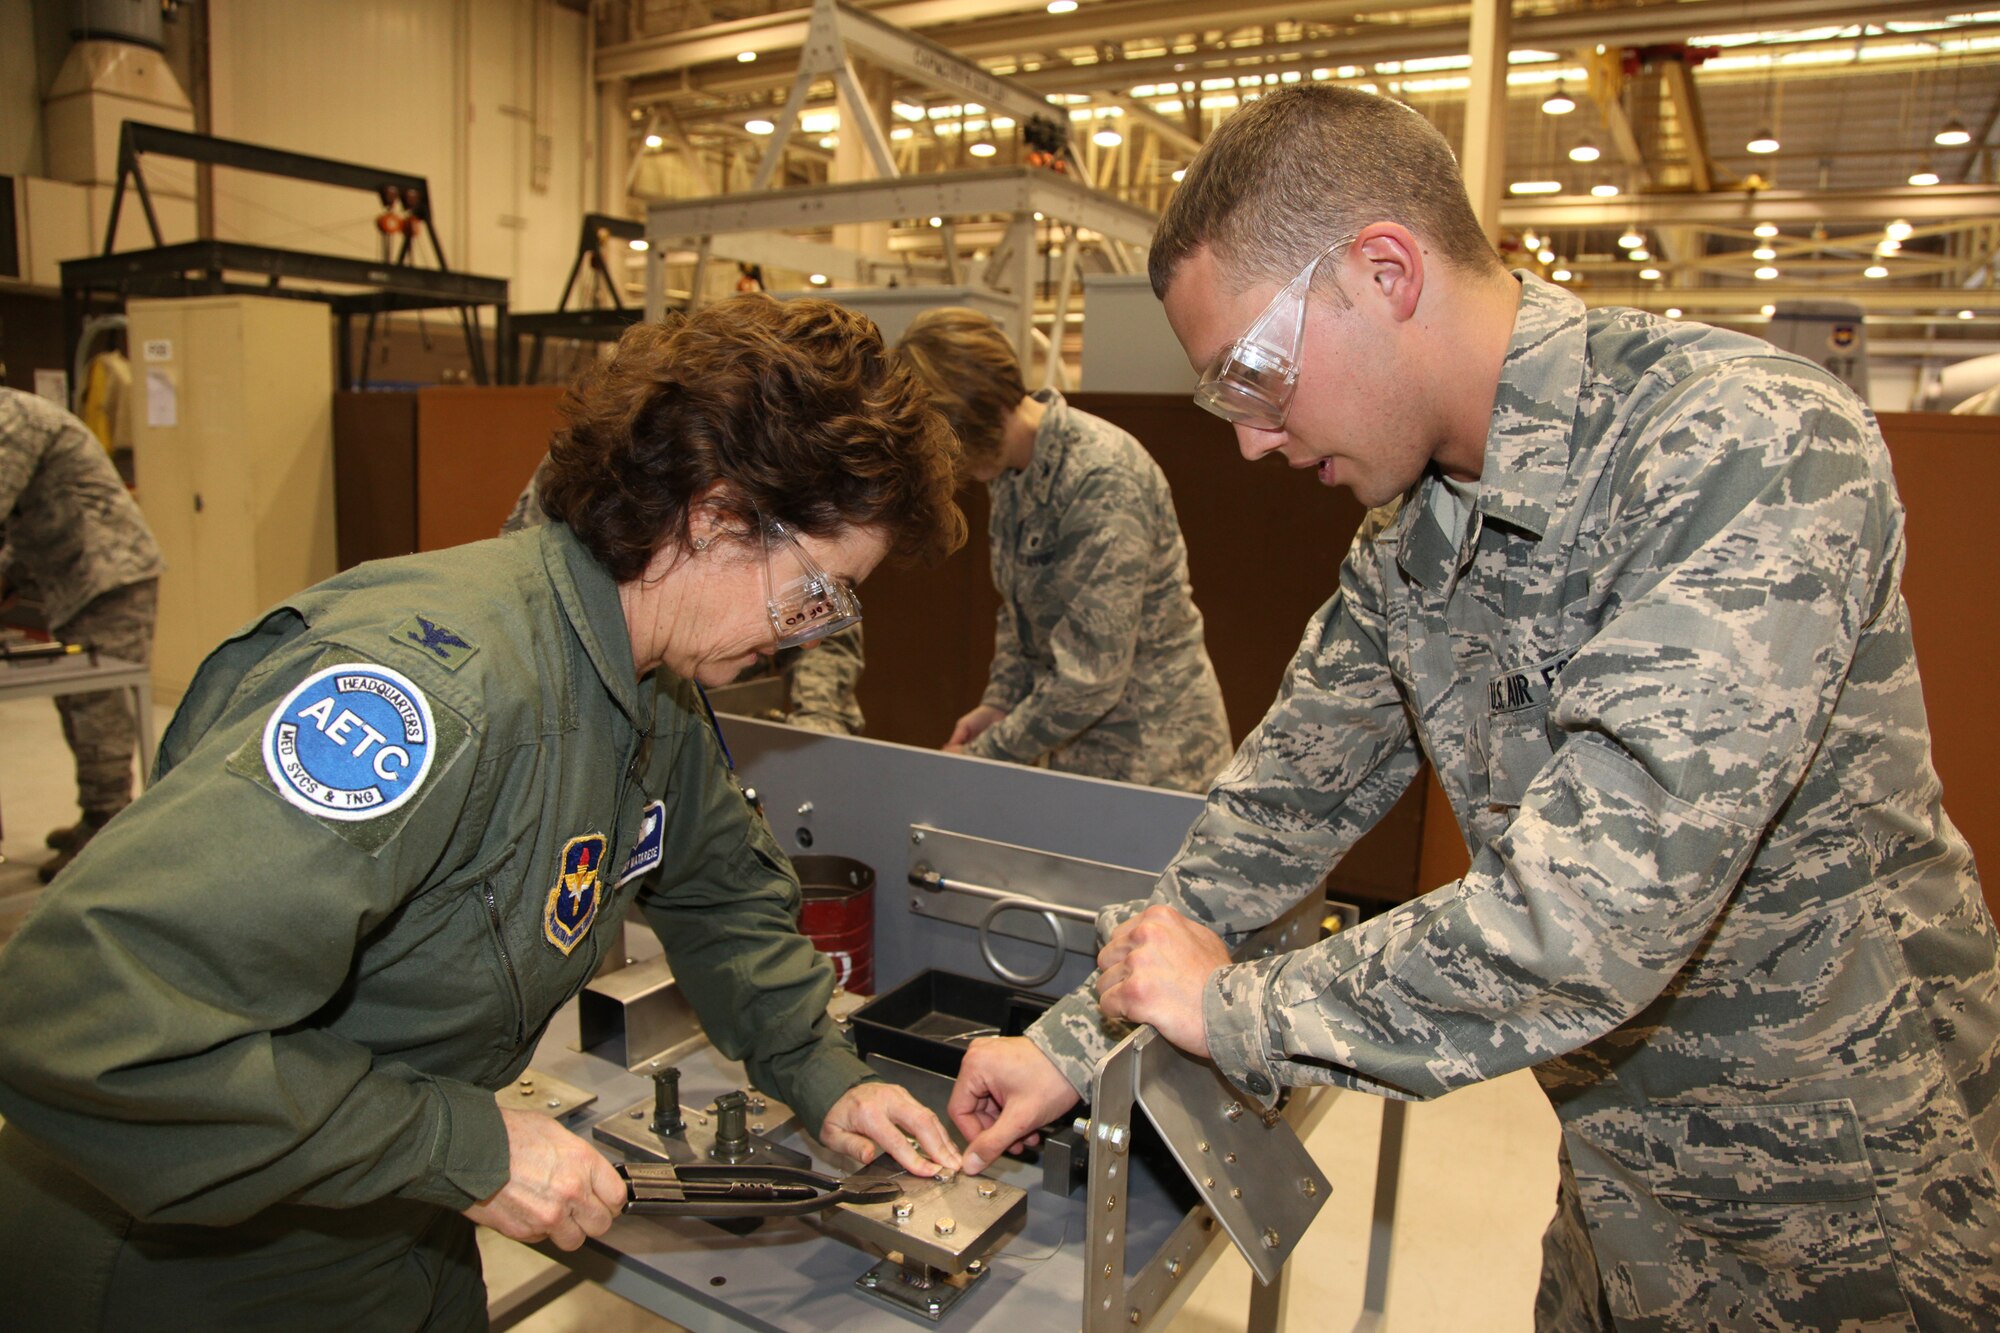 Col. Peggy Matarese, Air Education and Training Command command surgeon, works at a safety wiring table at the 361st Training Squadron March 2 during a tour at the squadron's propulsion shop. The colonel and other AETC leaders toured Sheppard as part of AETC's spring leadership conference. (U.S. Air Force photo/Airman 1st Class Adawn Kelsey)